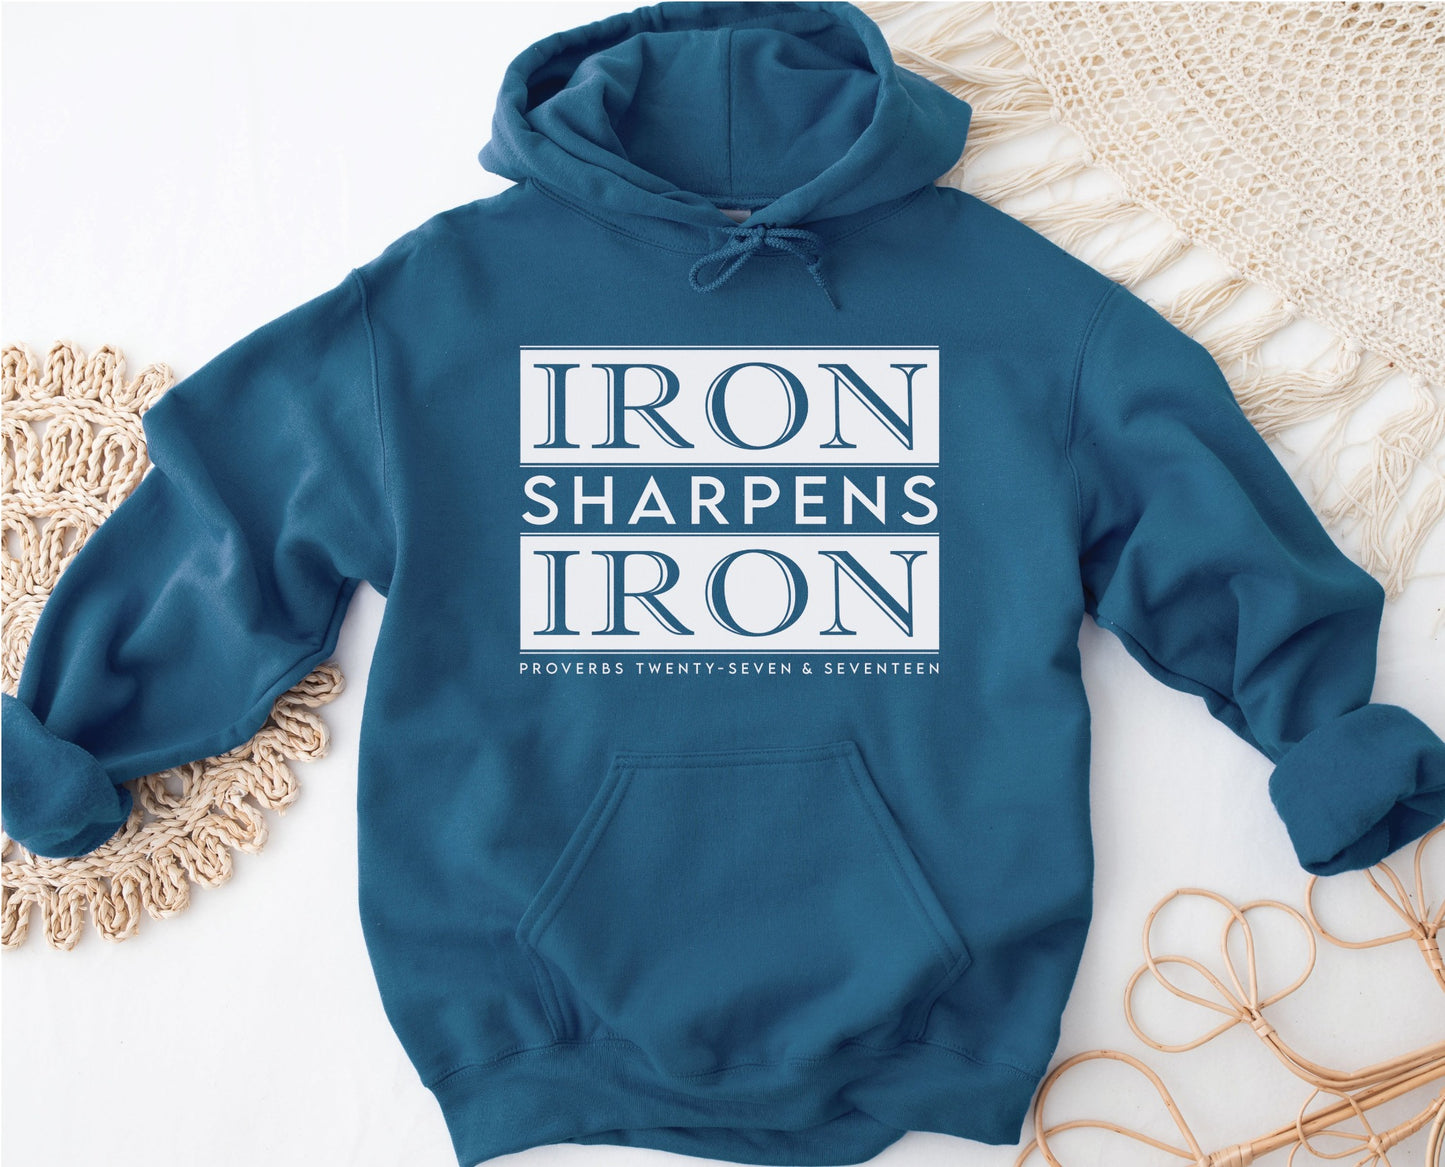 Iron Sharpens Iron Proverbs 27:17 Bible Verse Christian aesthetic faith-based hoodie with bold white design printed on cozy indigo blue unisex hoodie sweatshirt for men and women